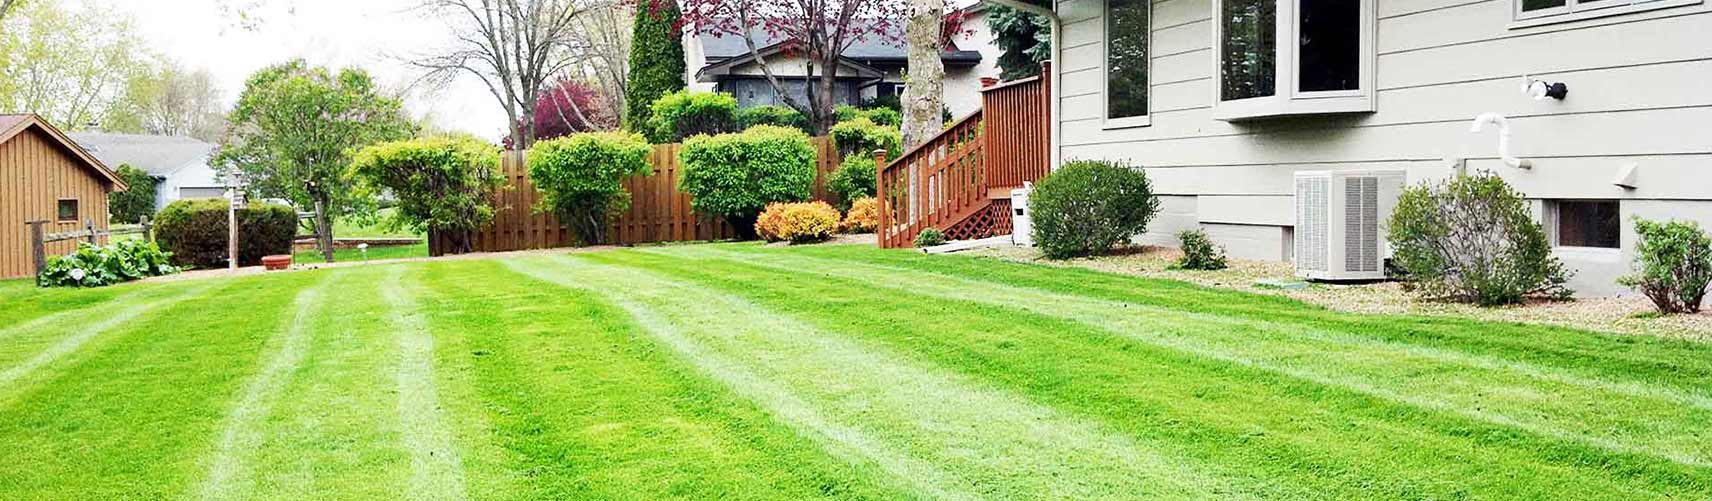 Minneapolis Lawn Care Services, Landscaping Company and Lawn Mowing Service